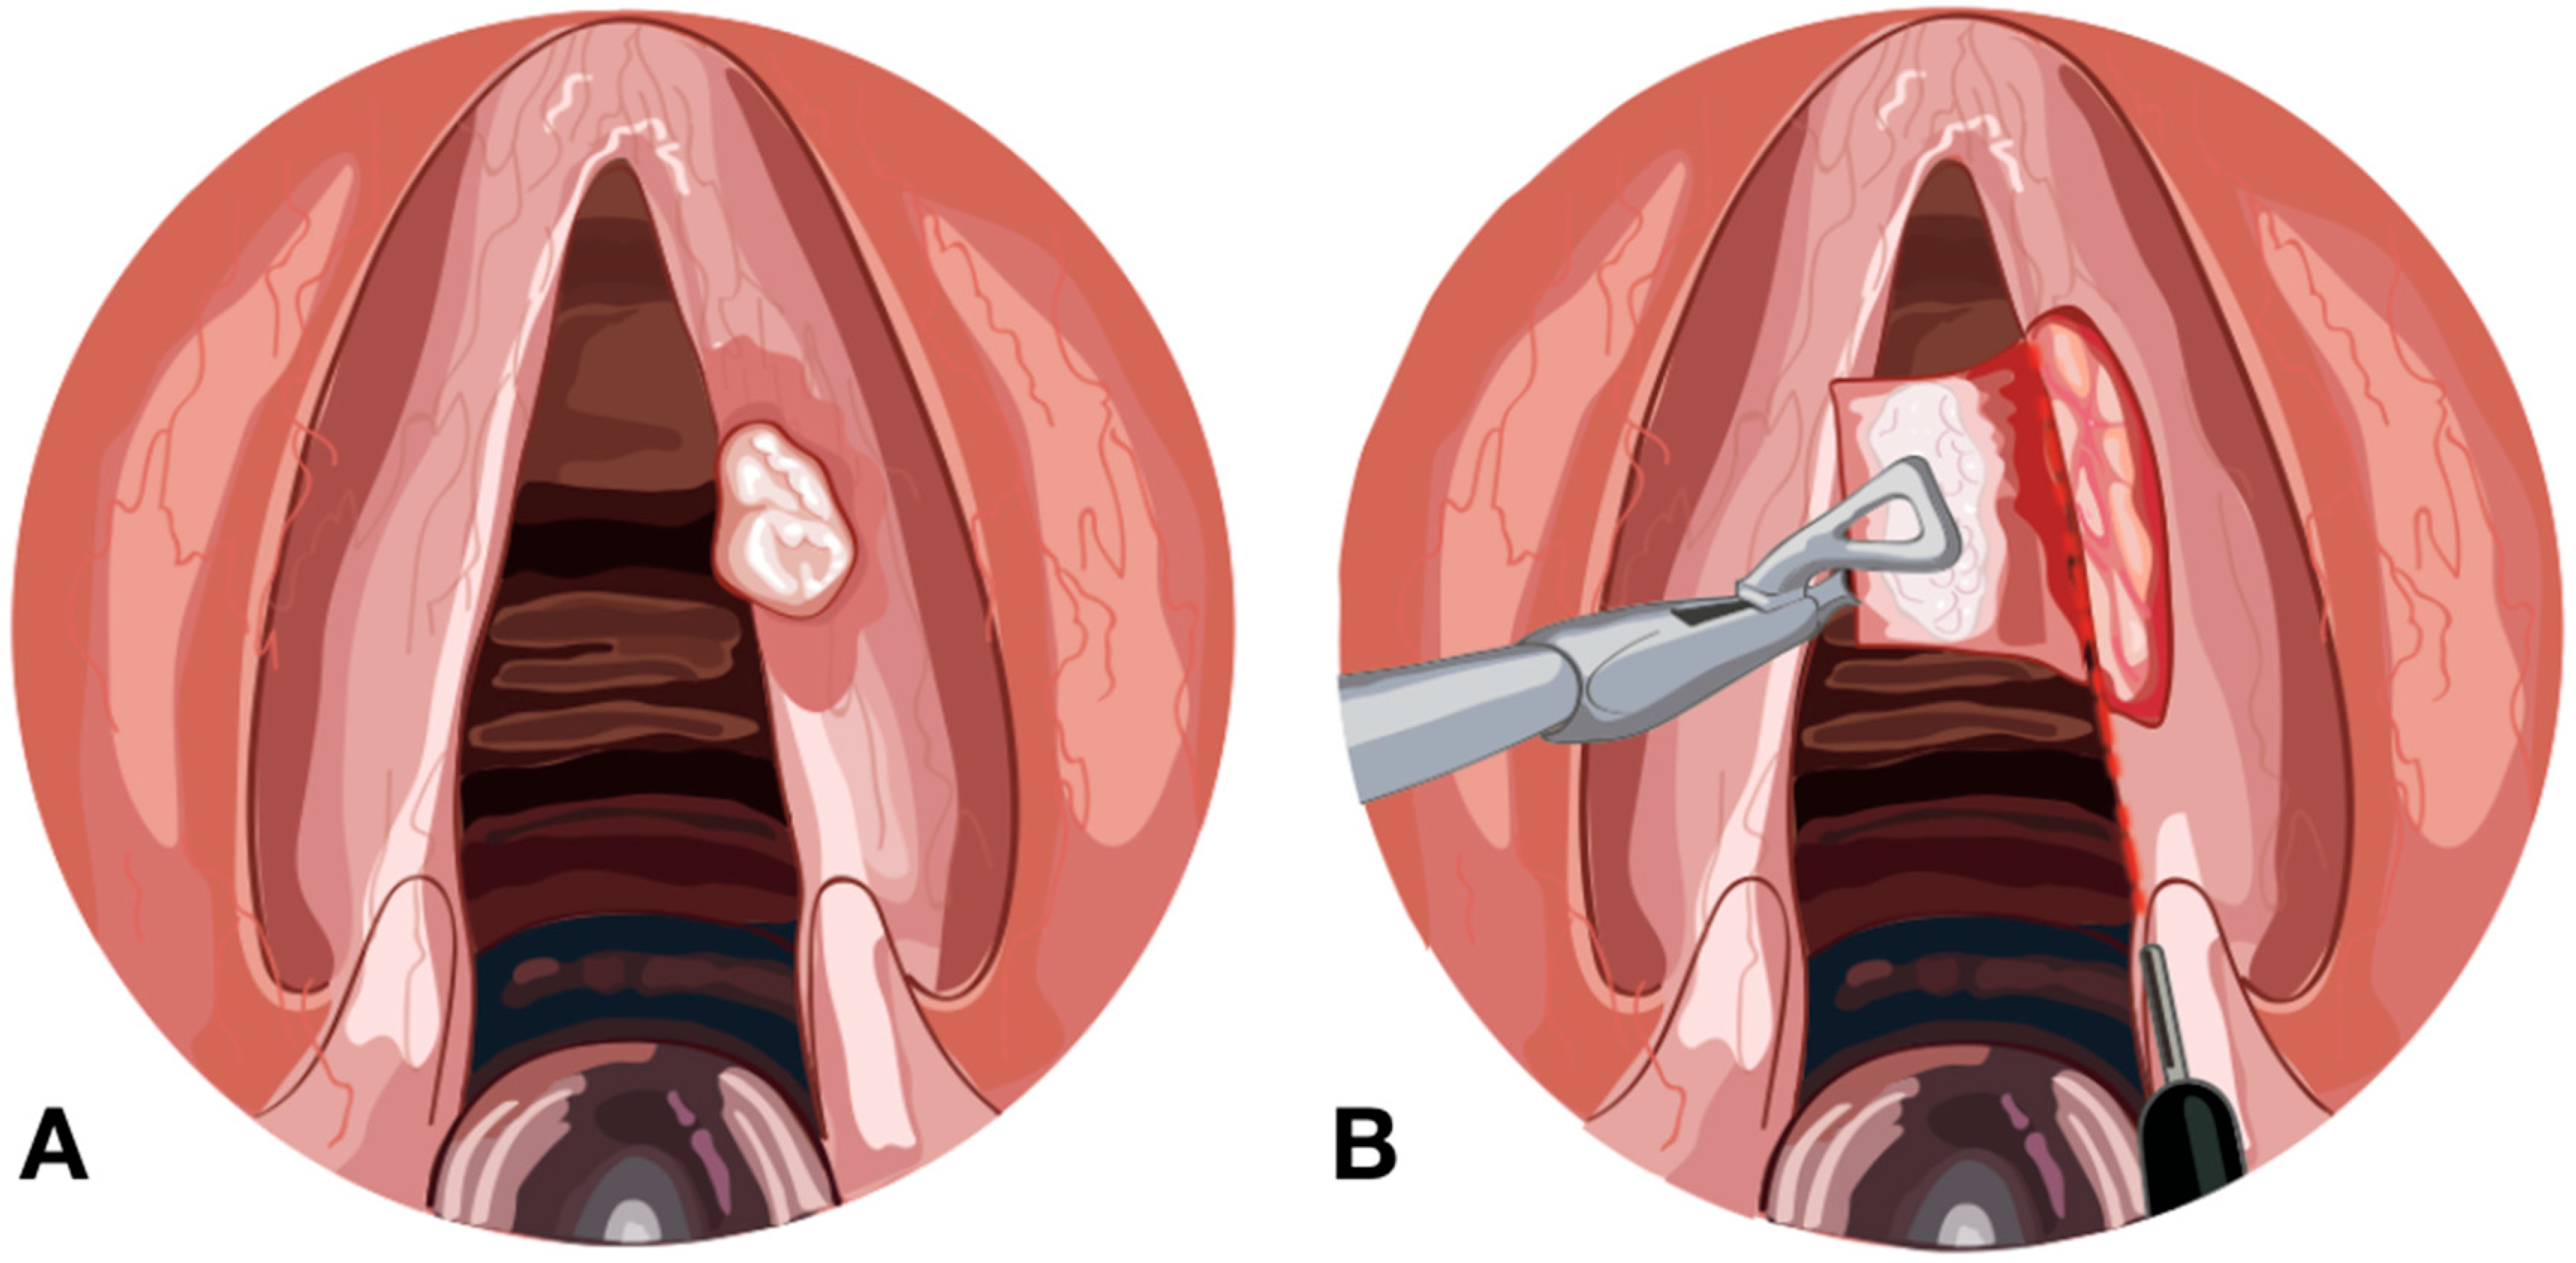 Medicines | Free Full-Text | CO2 Transoral Laser Microsurgery in Benign,  Premalignant and Malignant (Tis, T1, T2) Lesion of the Glottis. A  Literature Review